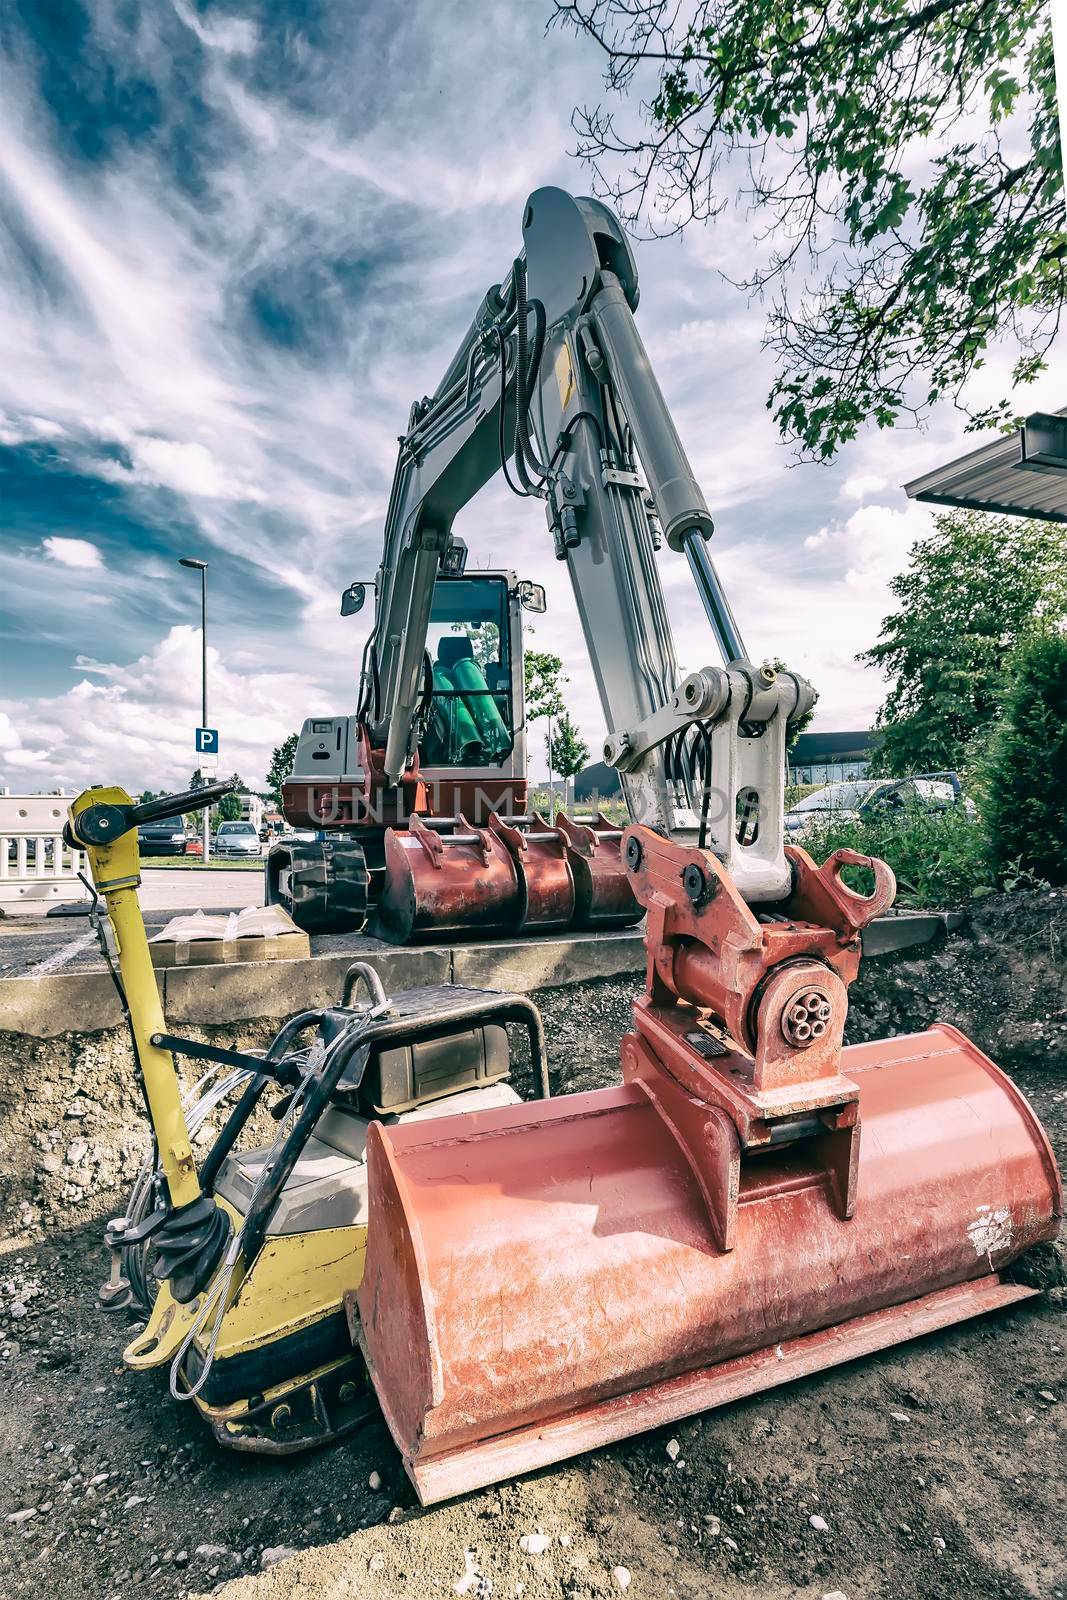 A stopping excavator at the construction site. Vintage view